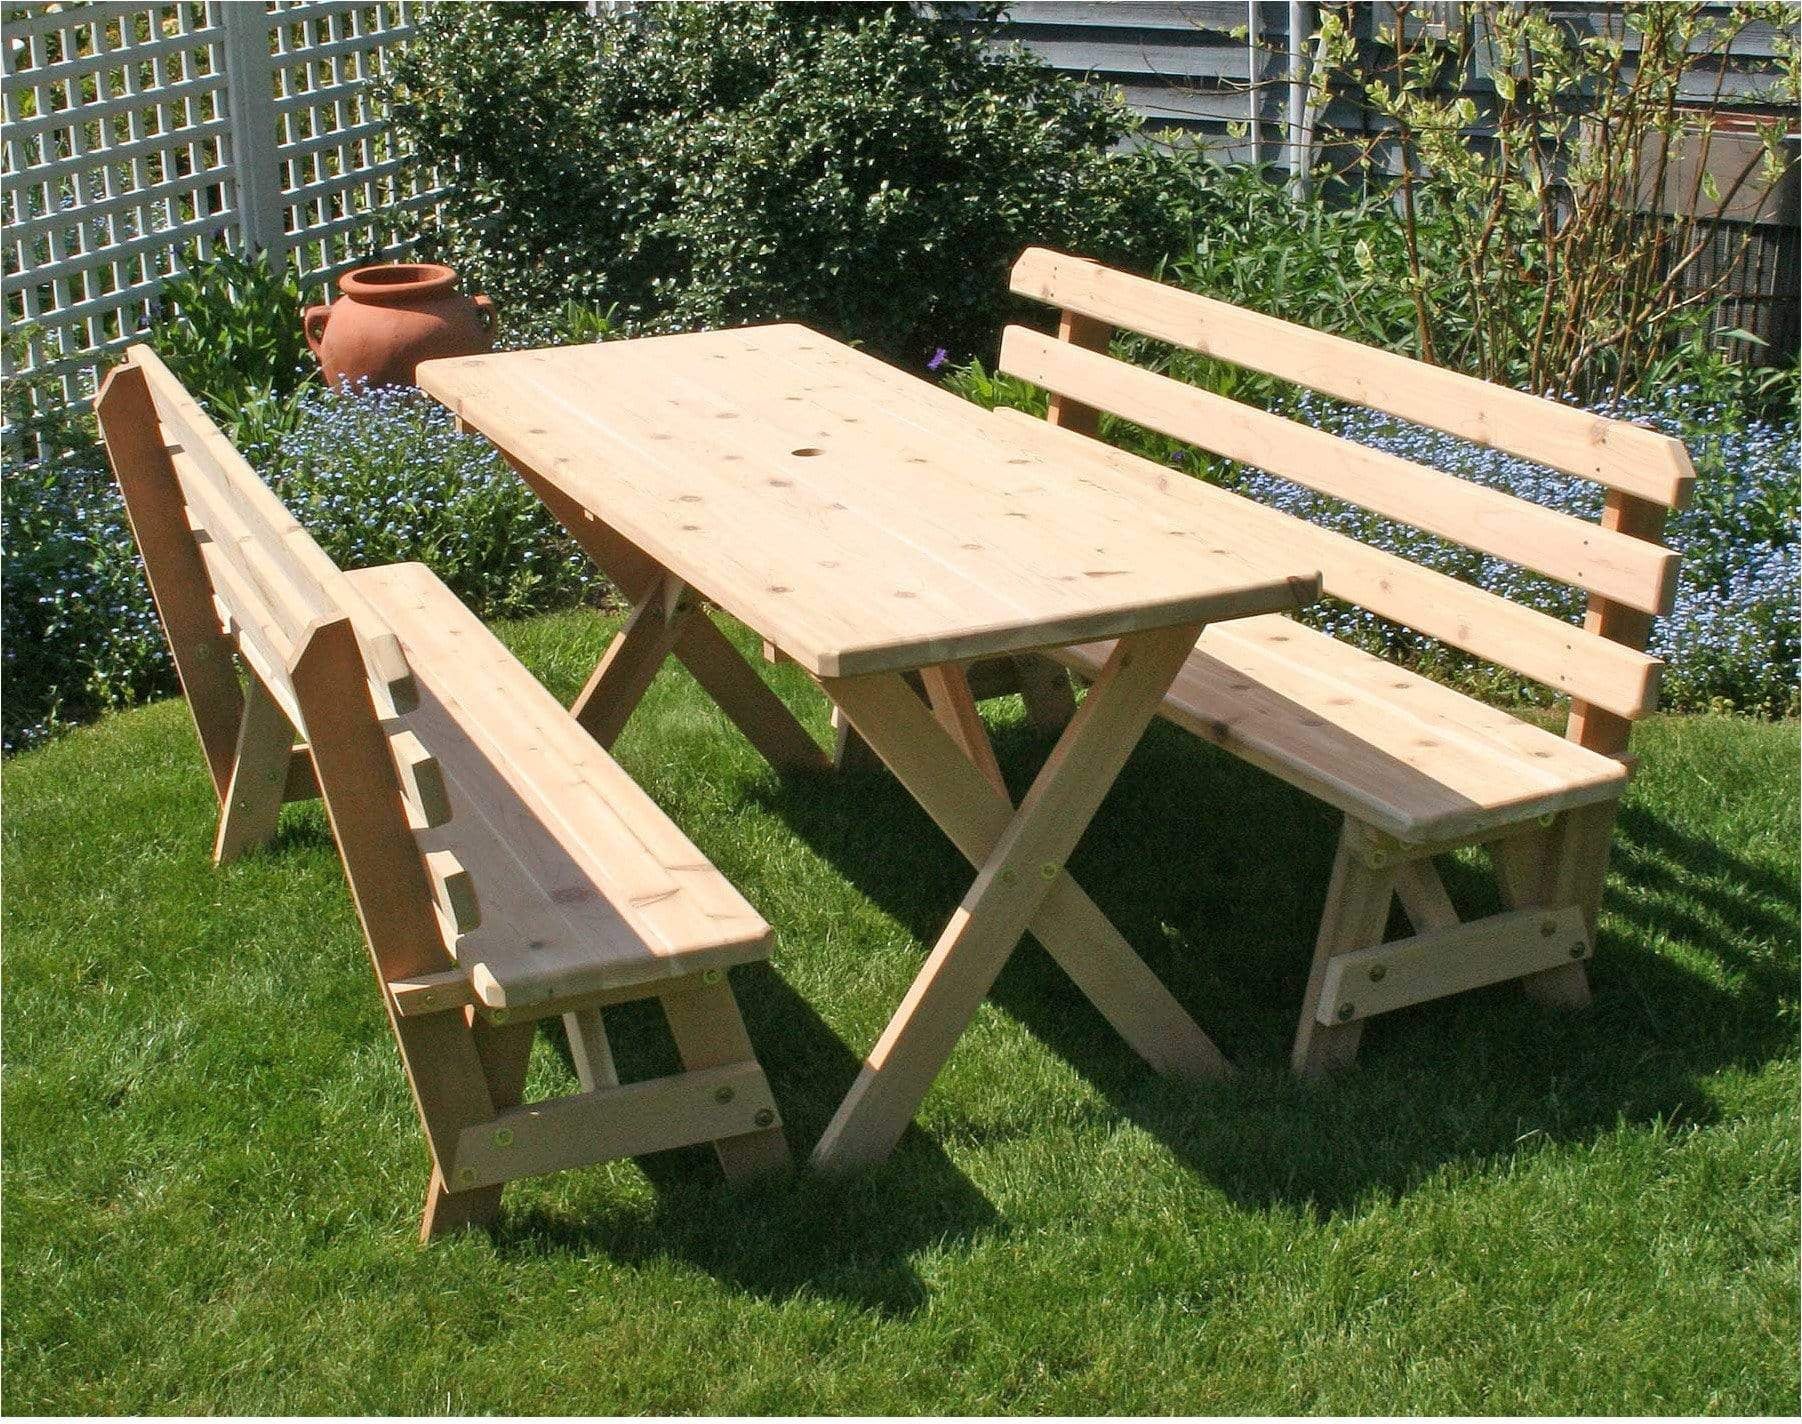 Creekvine Designs Cedar 8' Cross Legged Picnic Table with (4) Backed Benches-Rustic Furniture Marketplace